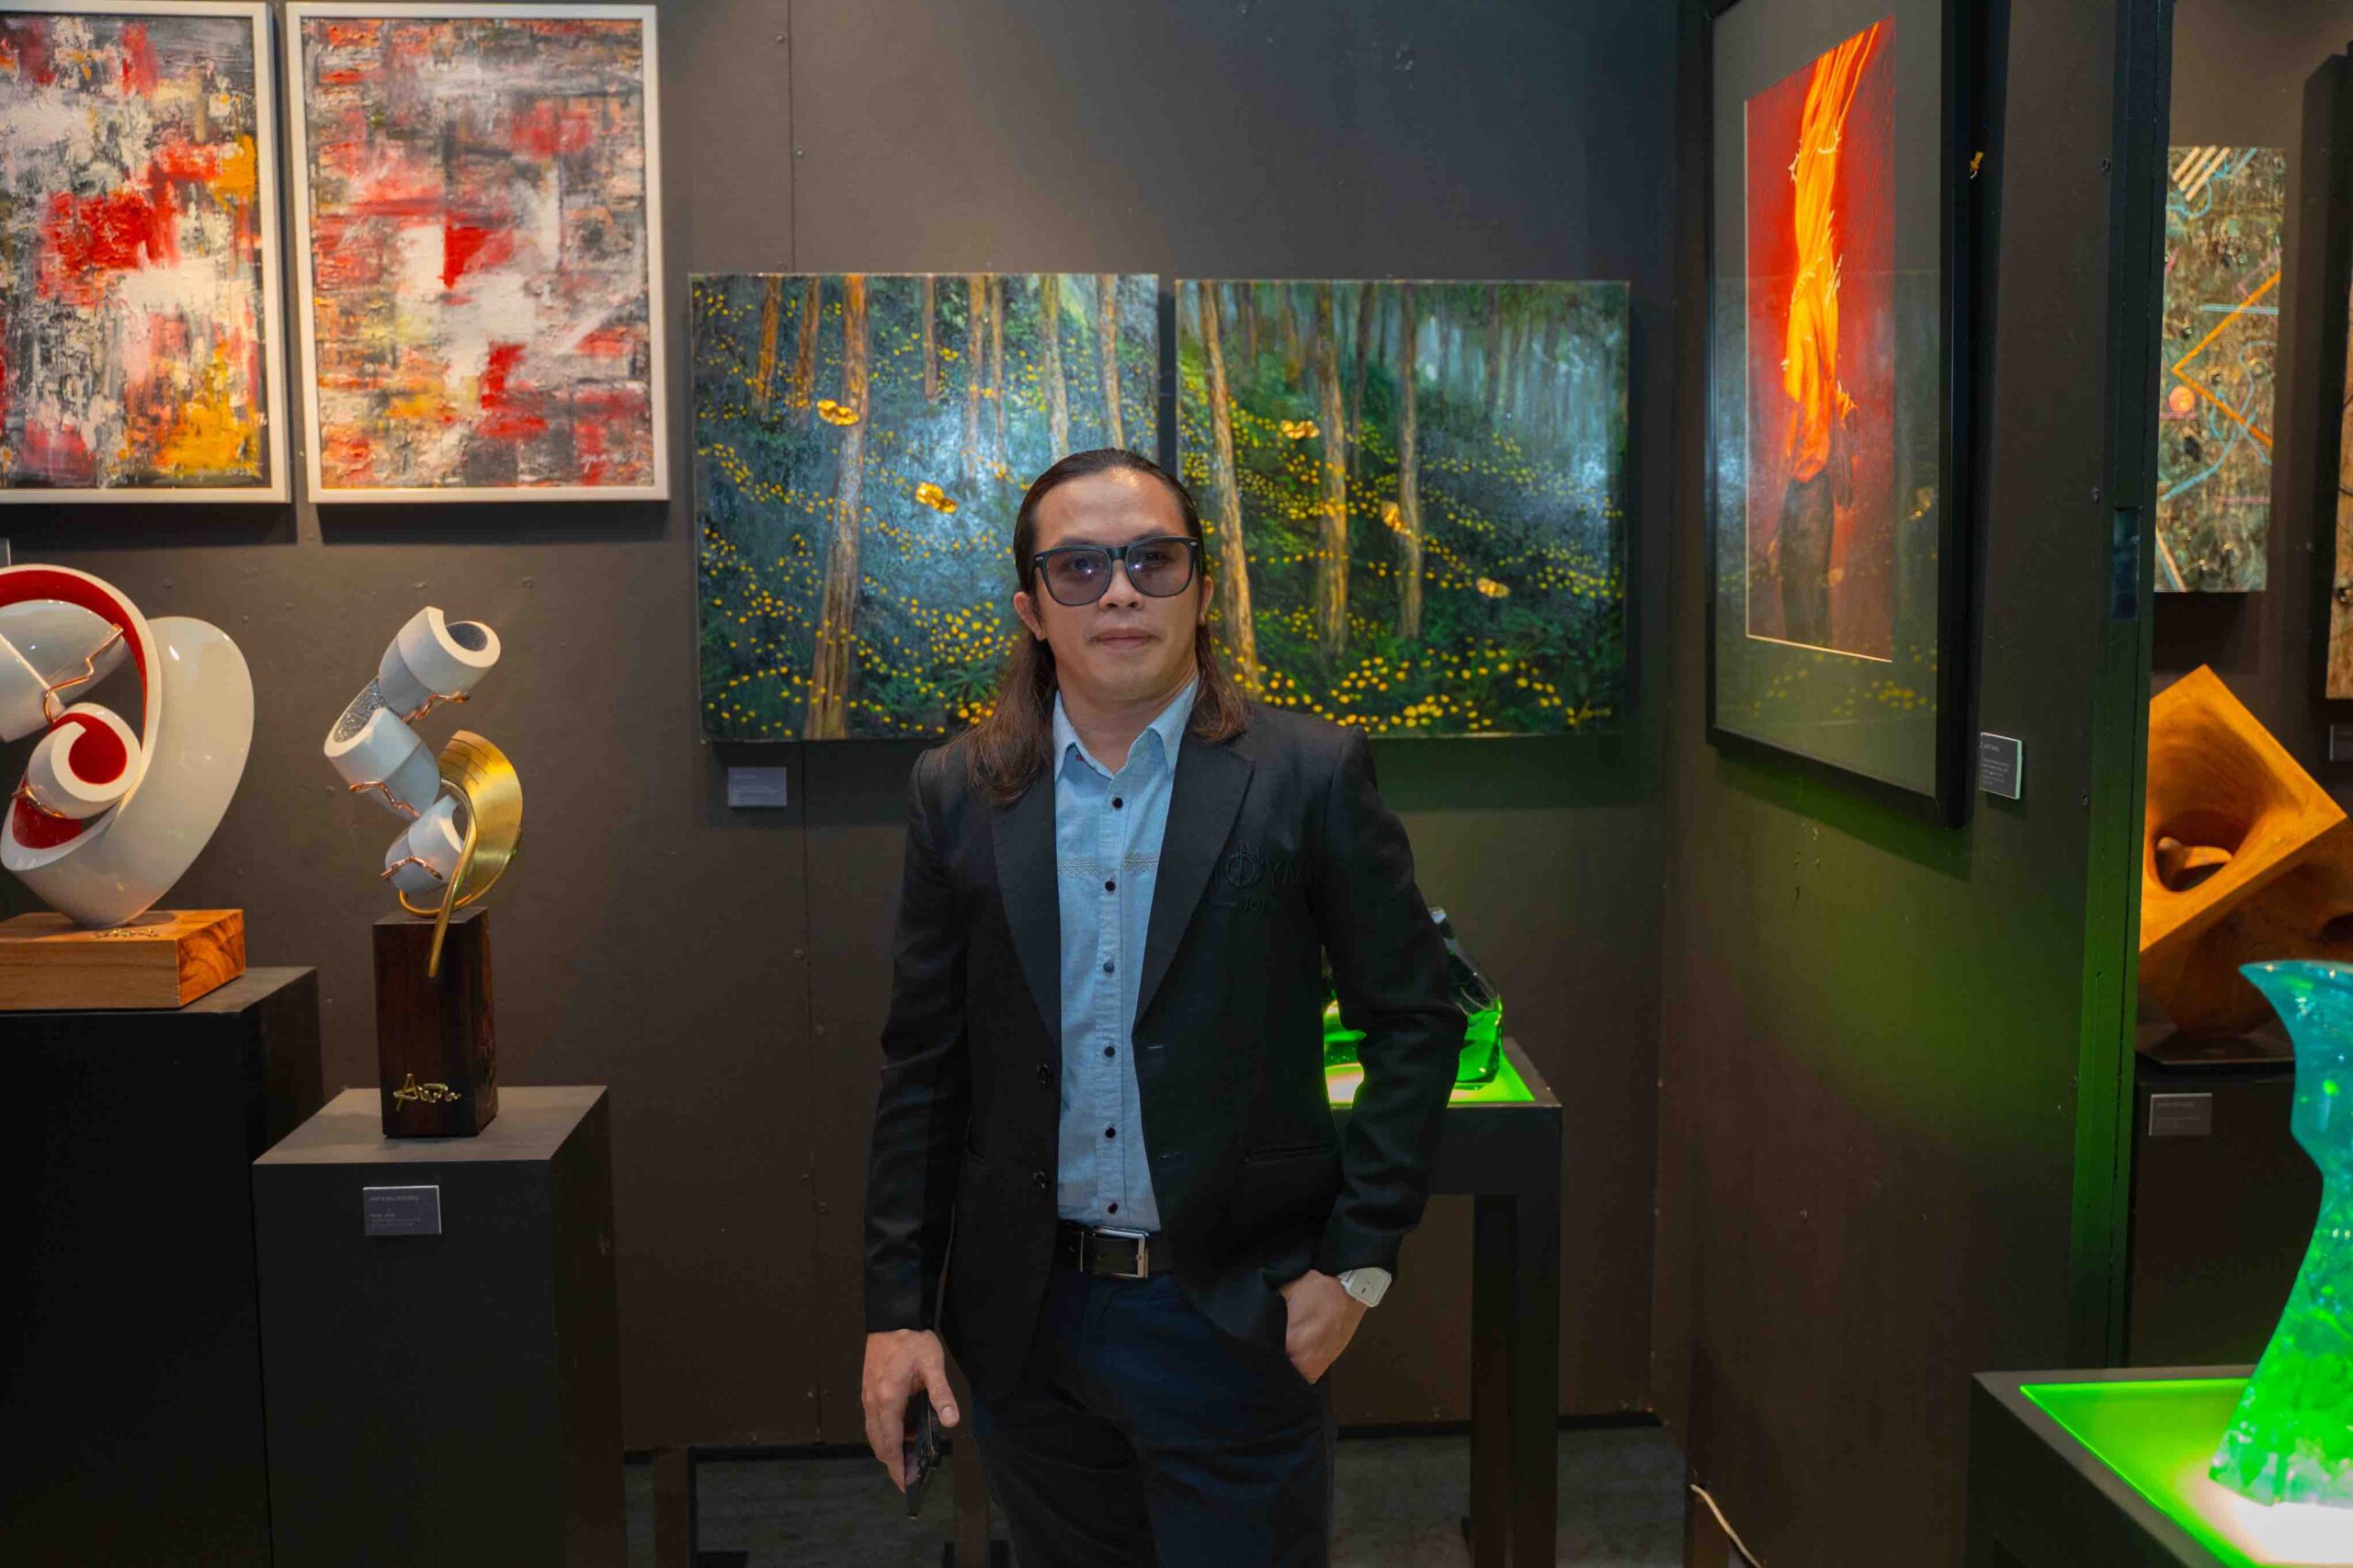 Abe Orobia at the vernissage of "Elemento art, light, flow"